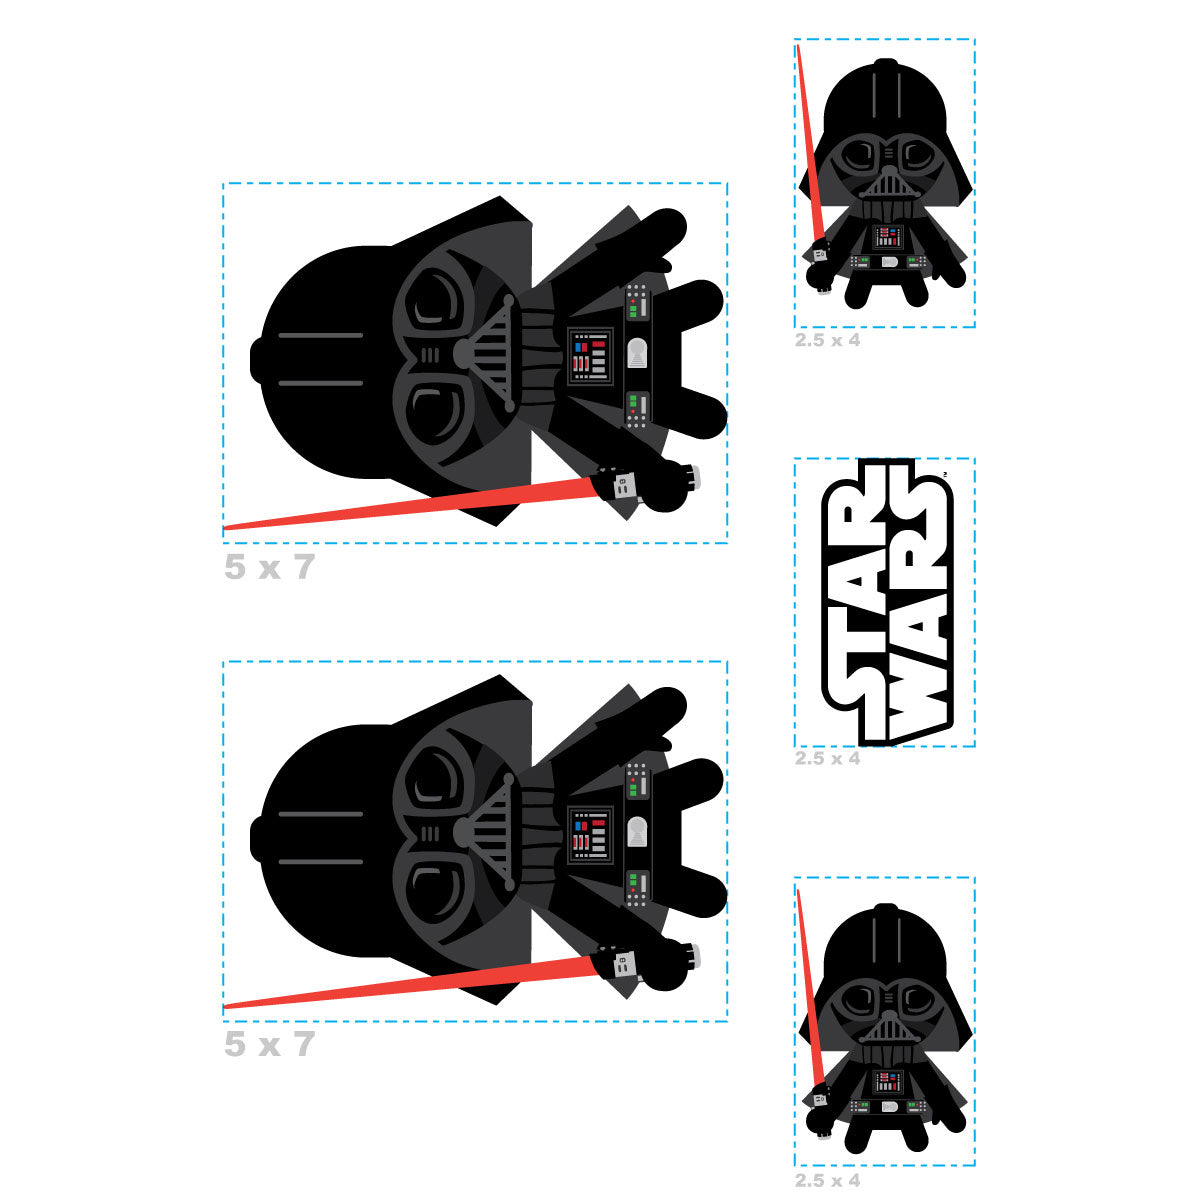 Sheet of 5 -Darth Vader Minis        - Officially Licensed Star Wars Removable    Adhesive Decal